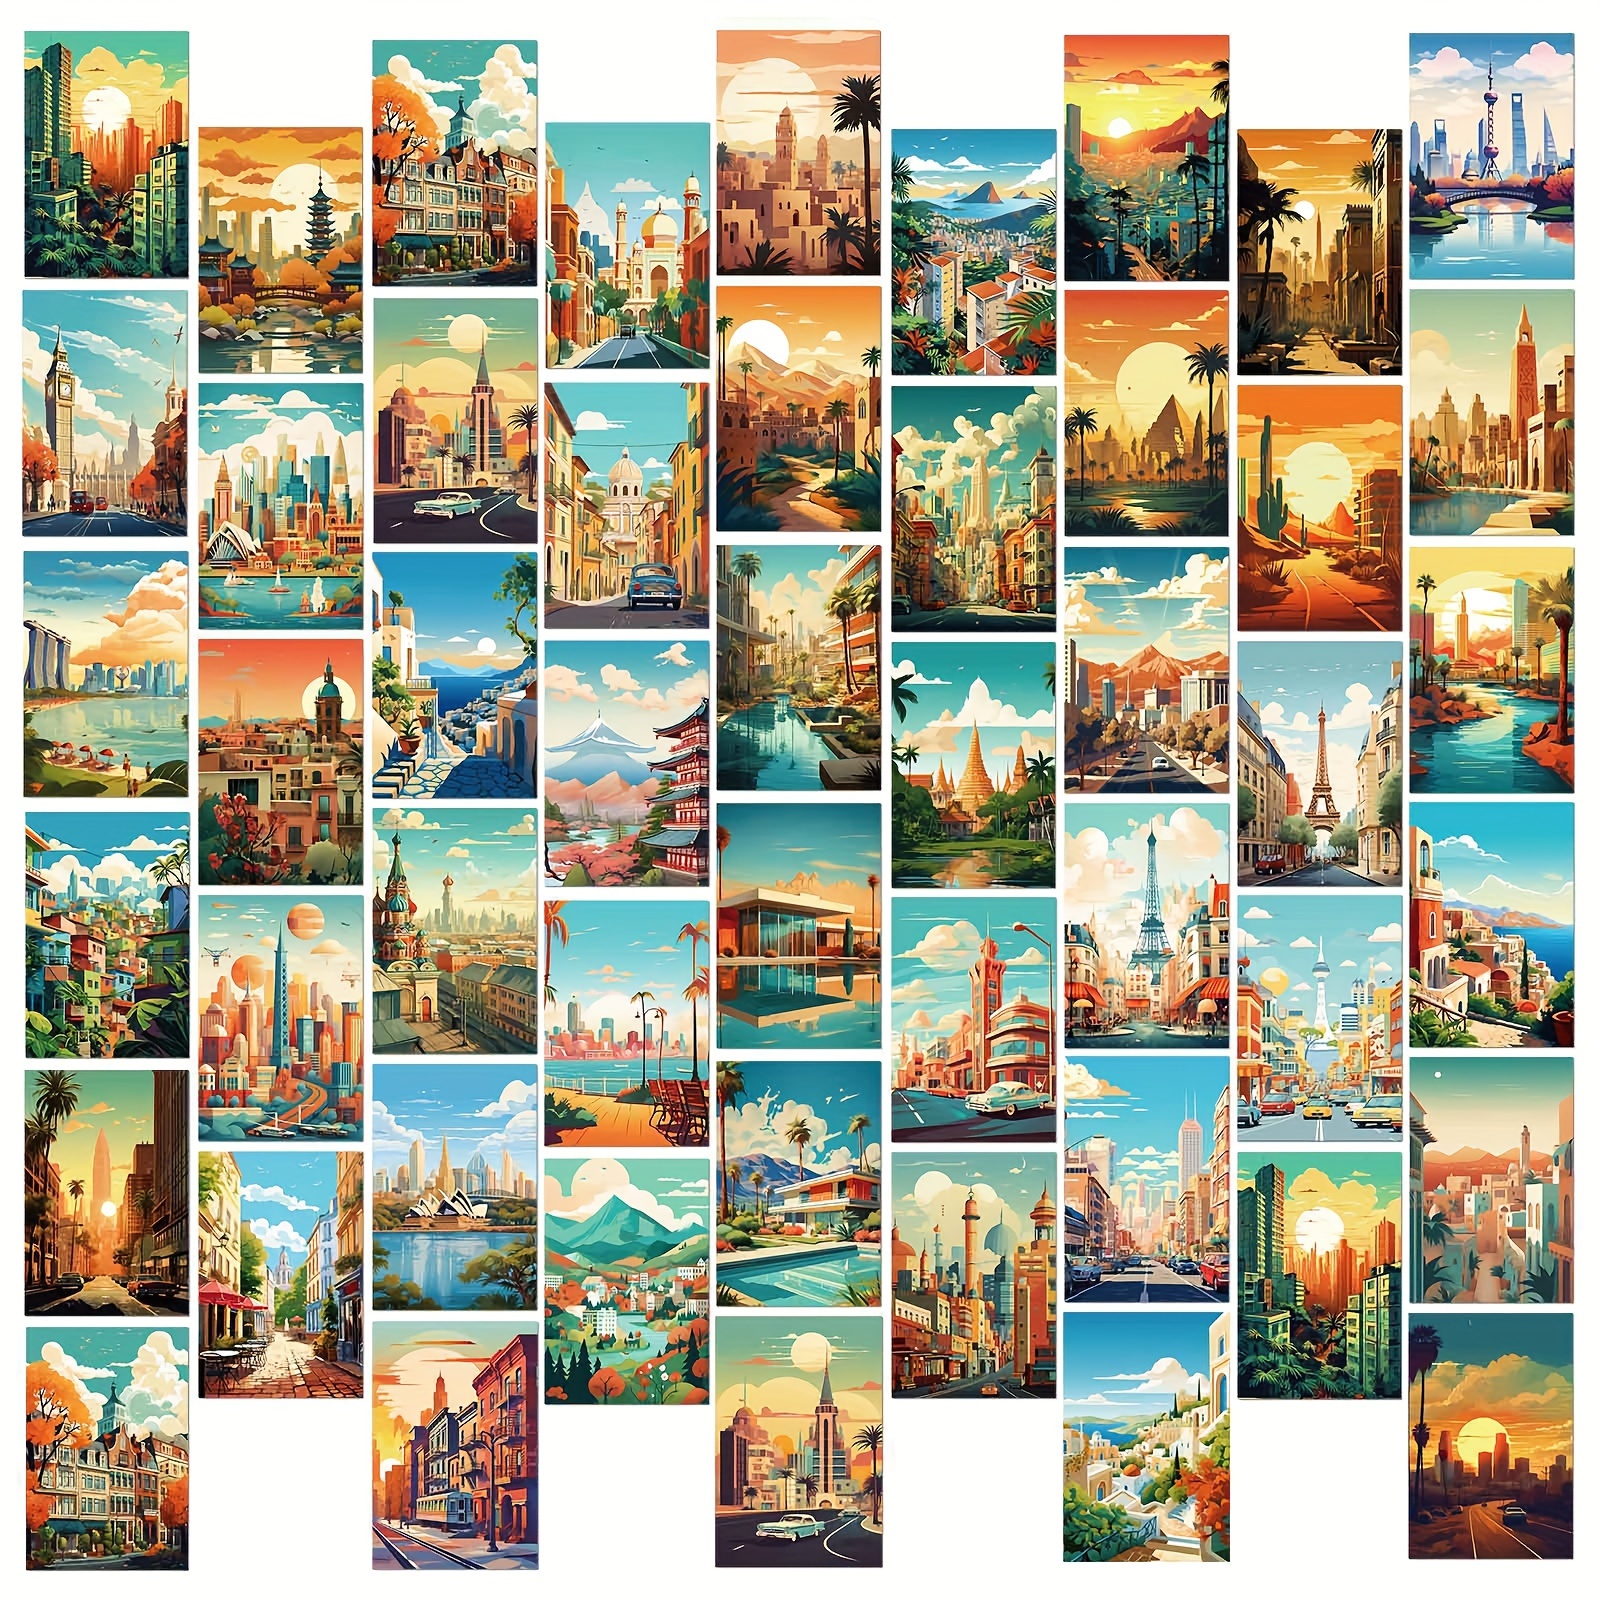  60 PCS Aesthetic Room Decor Retro Wall Collage Kit Records  Picture for Dorm Bedroom 80s 90s Art Girl Teens Women Vintage Posters Indie  Photo: Posters & Prints